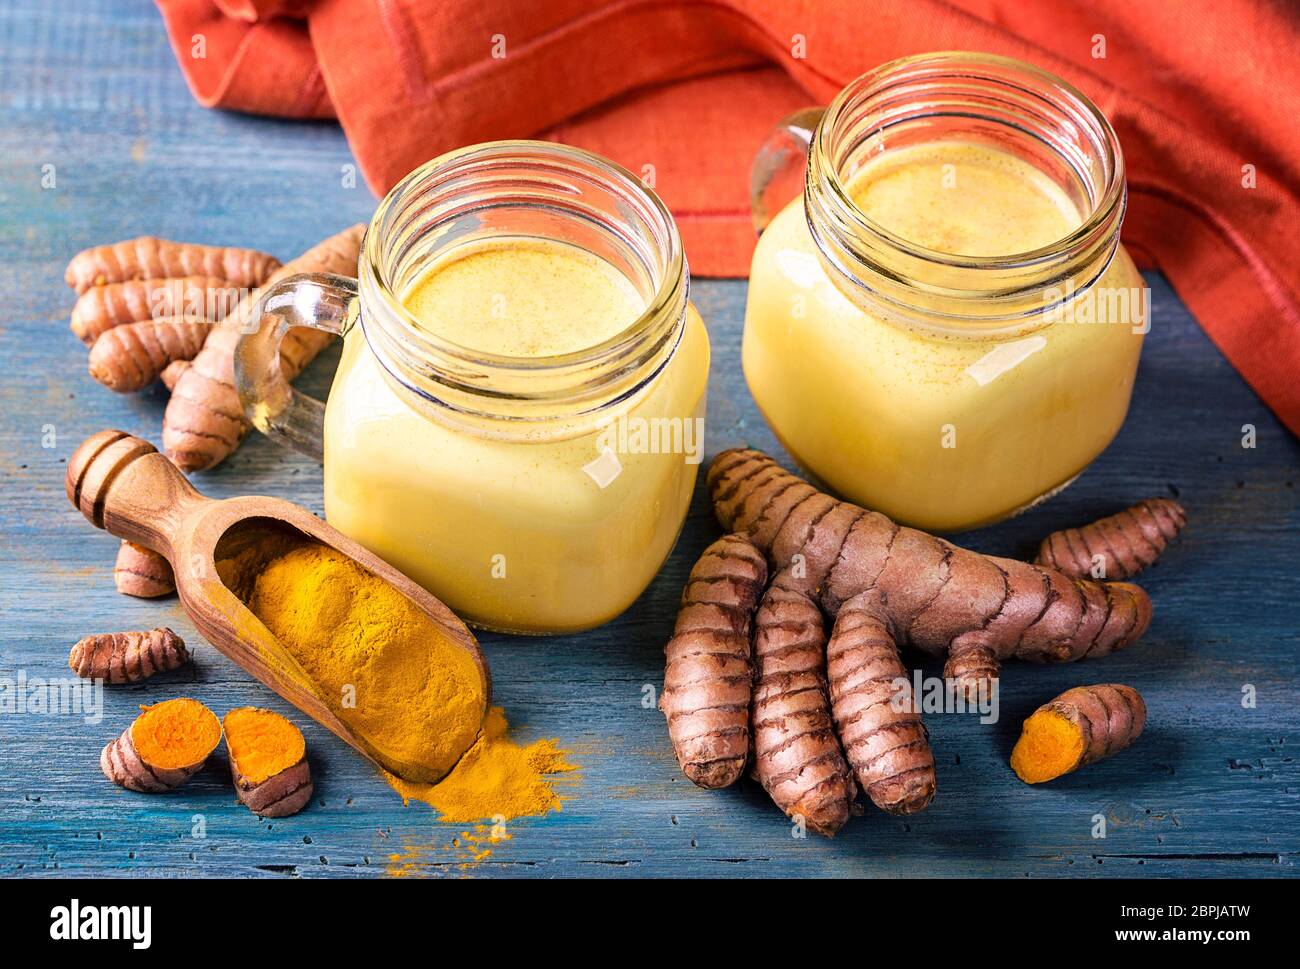 Golden milk, beverage with turmeric and spices Stock Photo